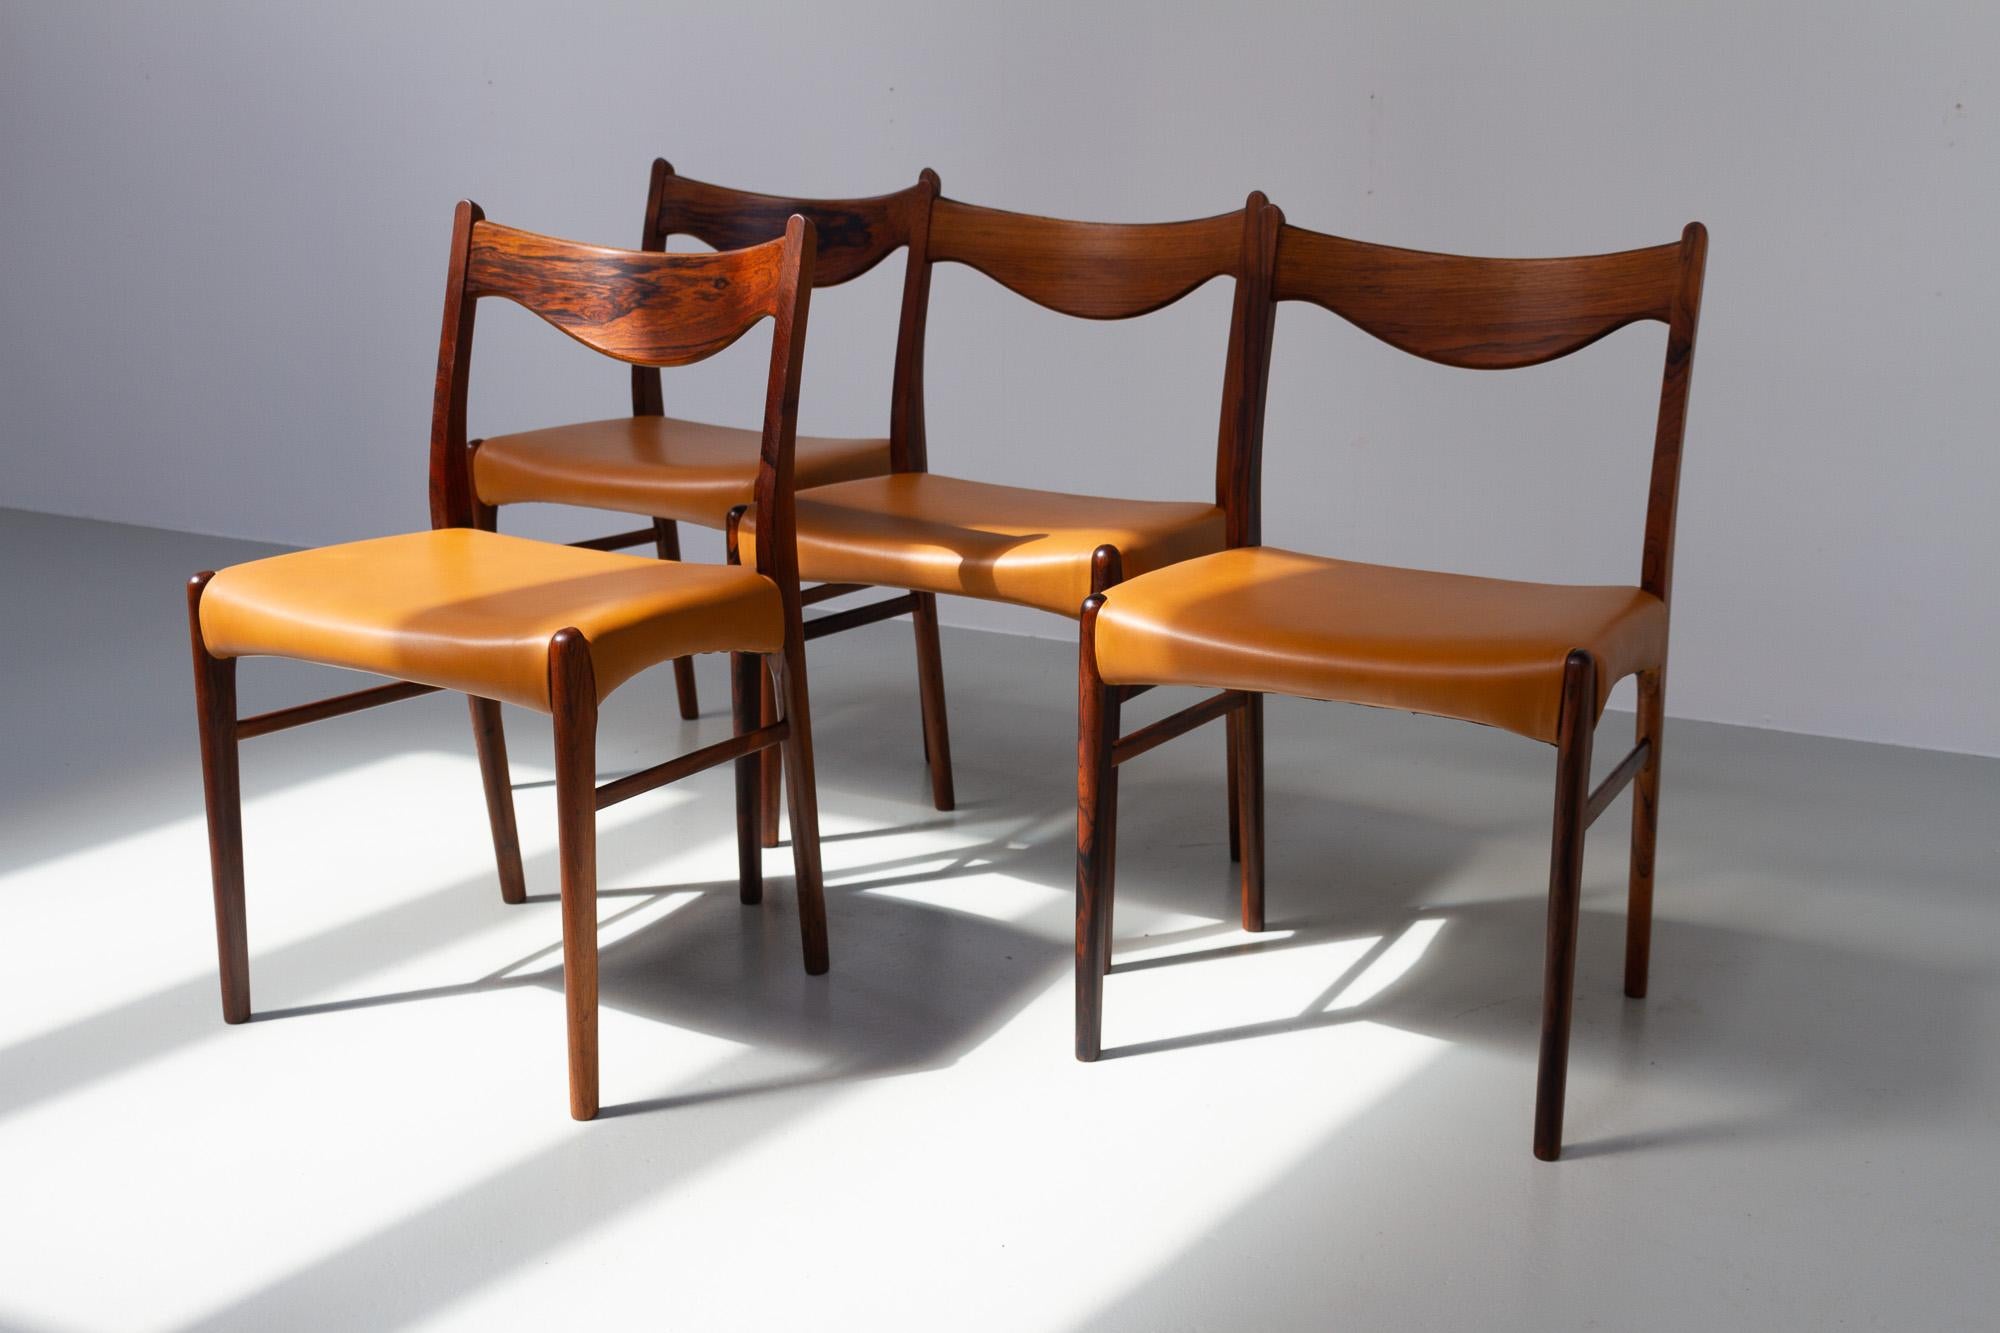 Mid-Century Modern Danish Modern Rosewood Dining Room Chairs GS61 by Arne Wahl Iversen, 1950s